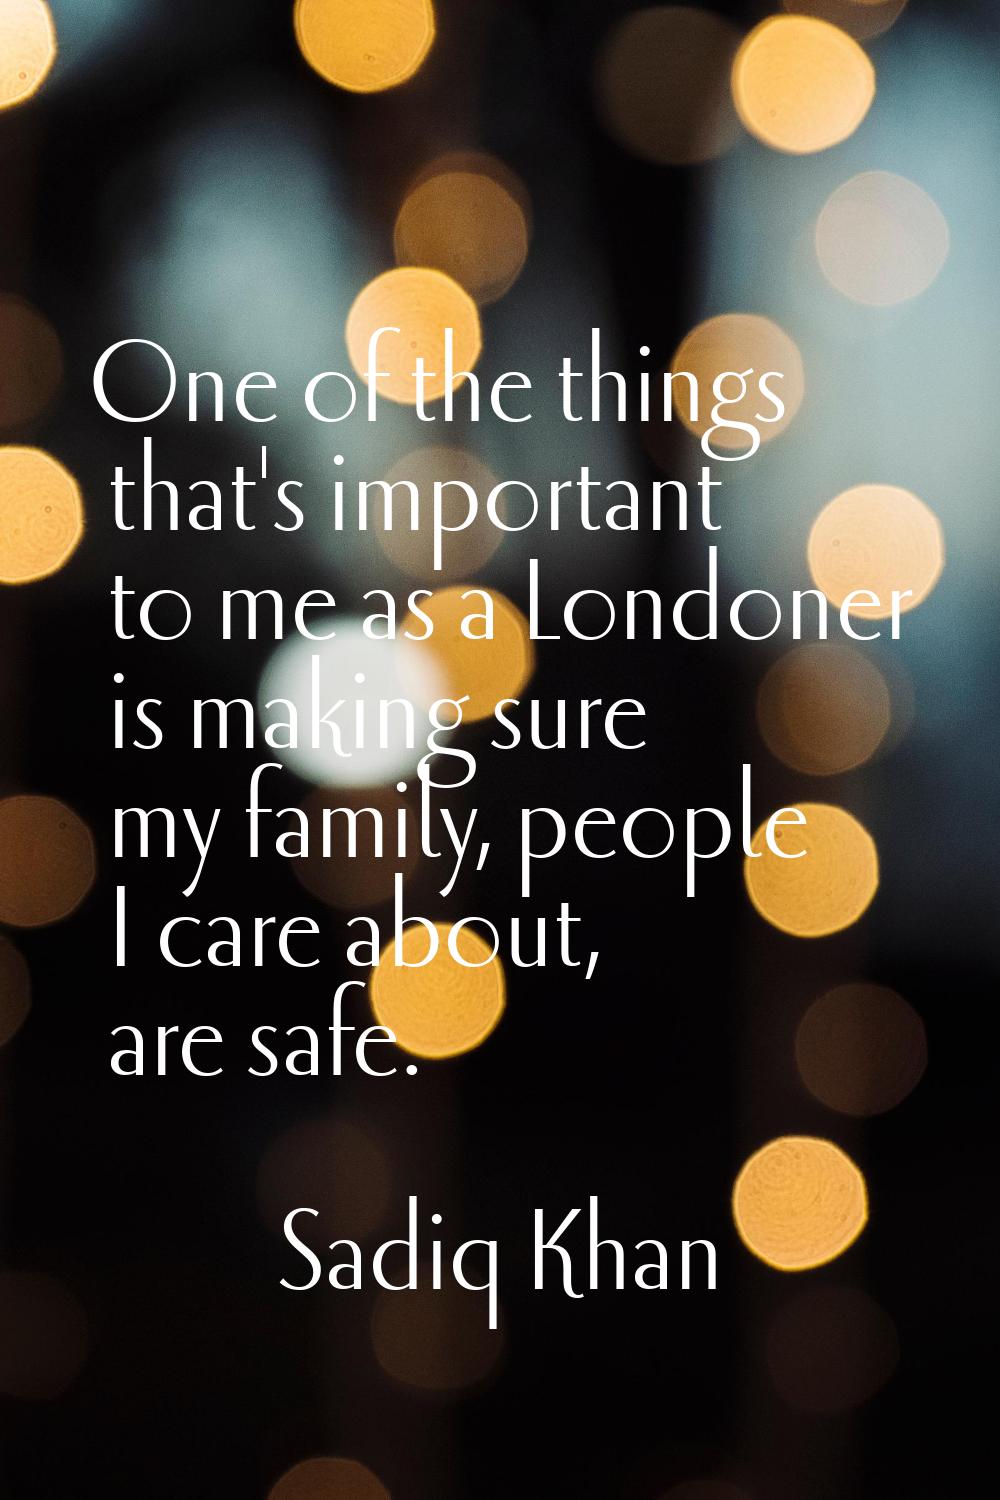 One of the things that's important to me as a Londoner is making sure my family, people I care abou